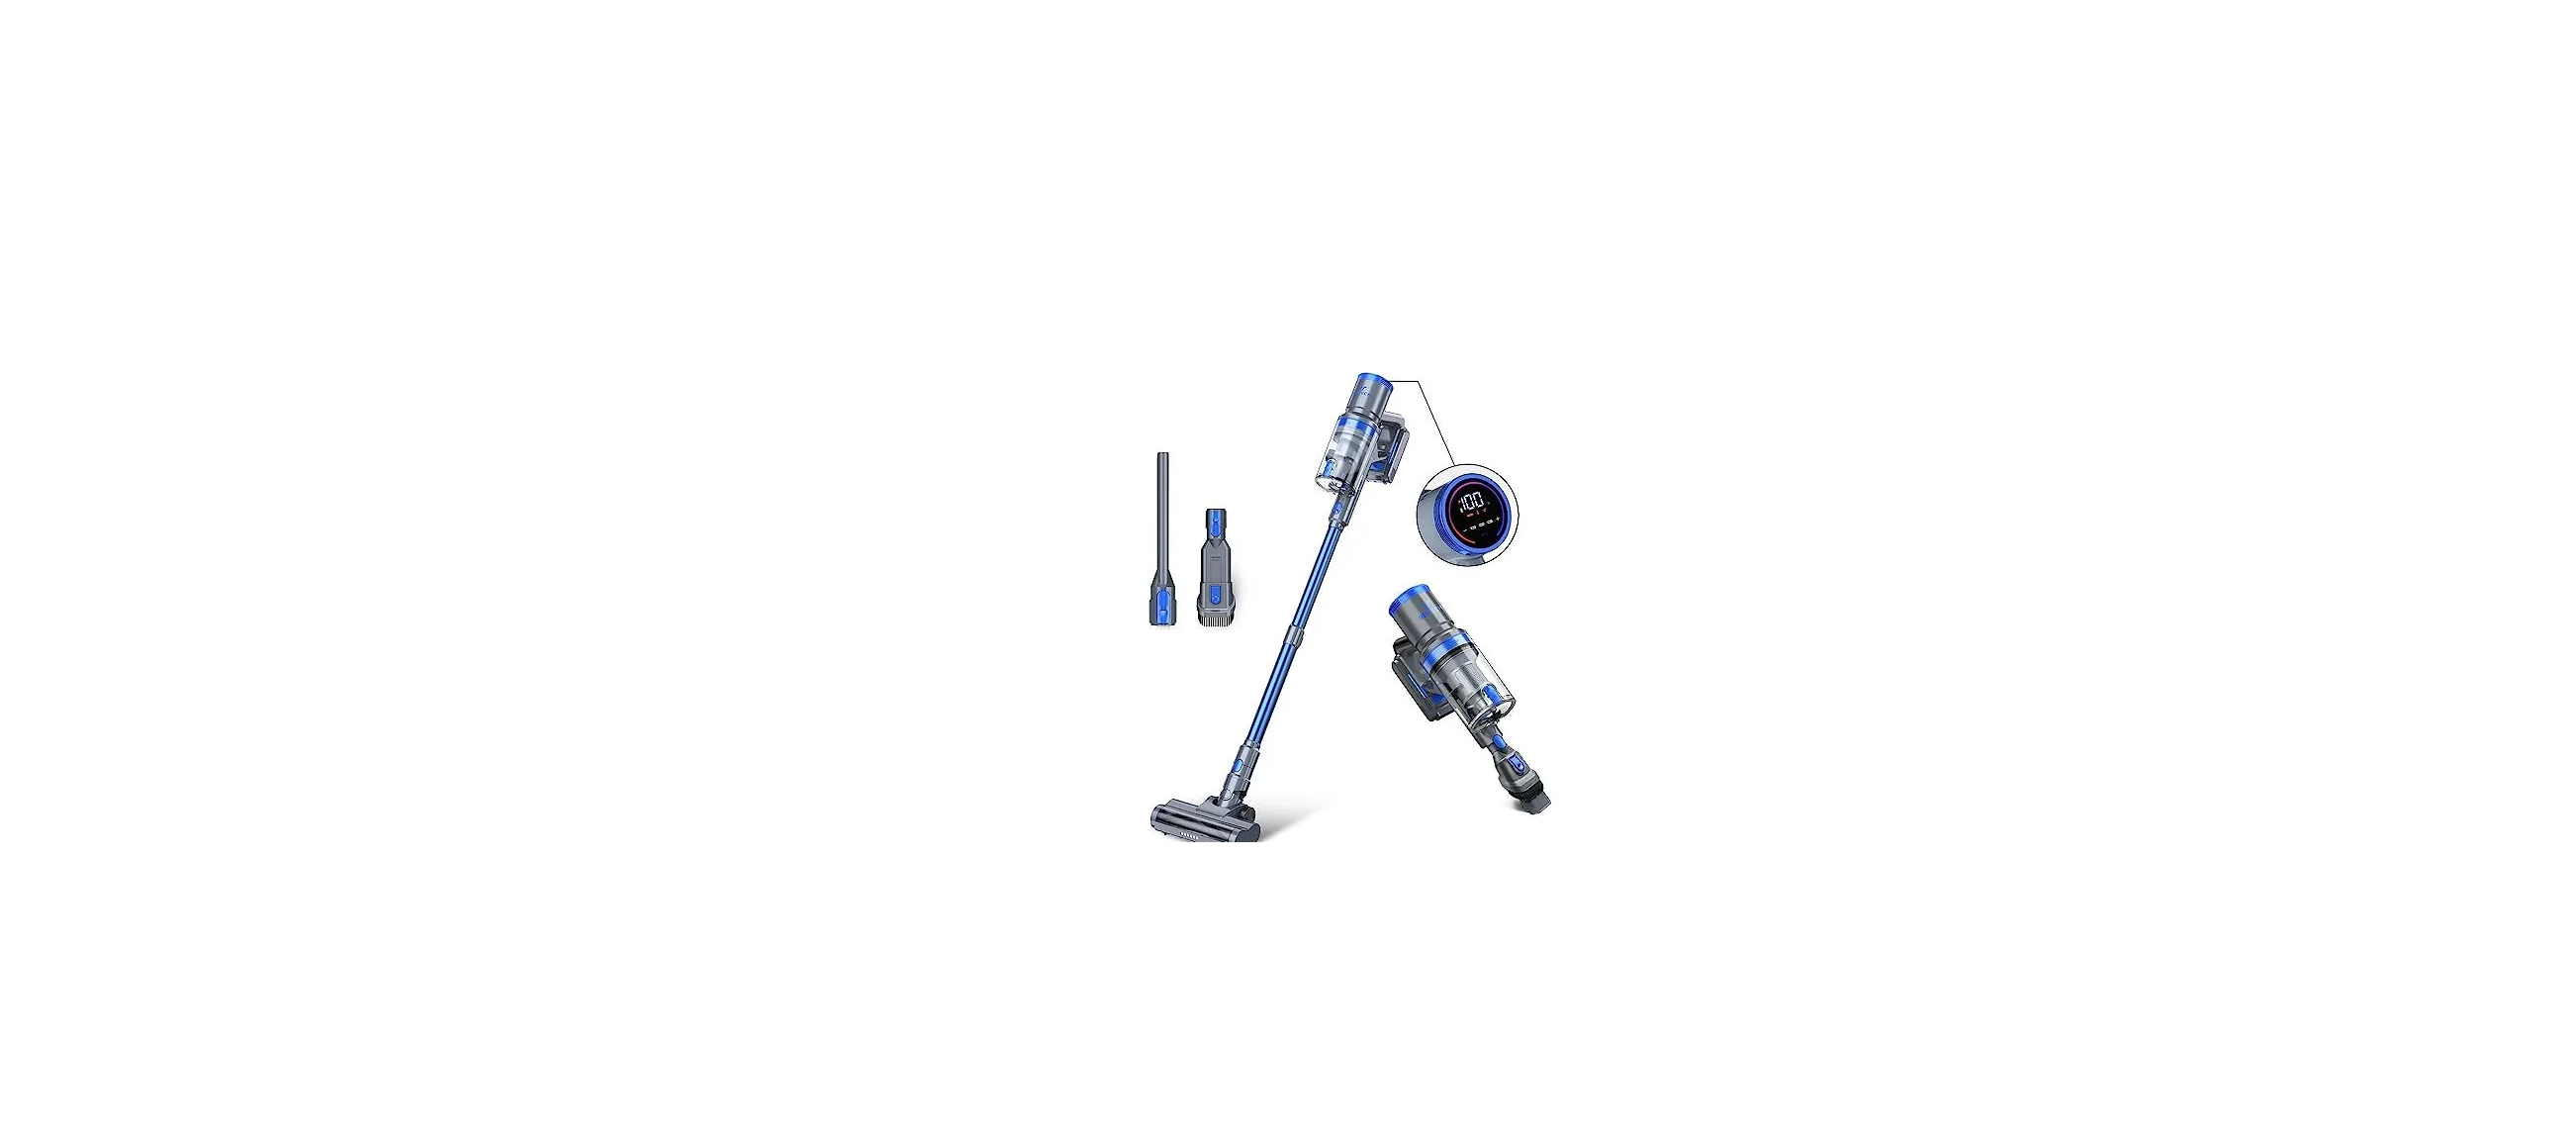 Read more about the article Lubluelu KB-H009 Cordless Vacuum Cleaner User Manual